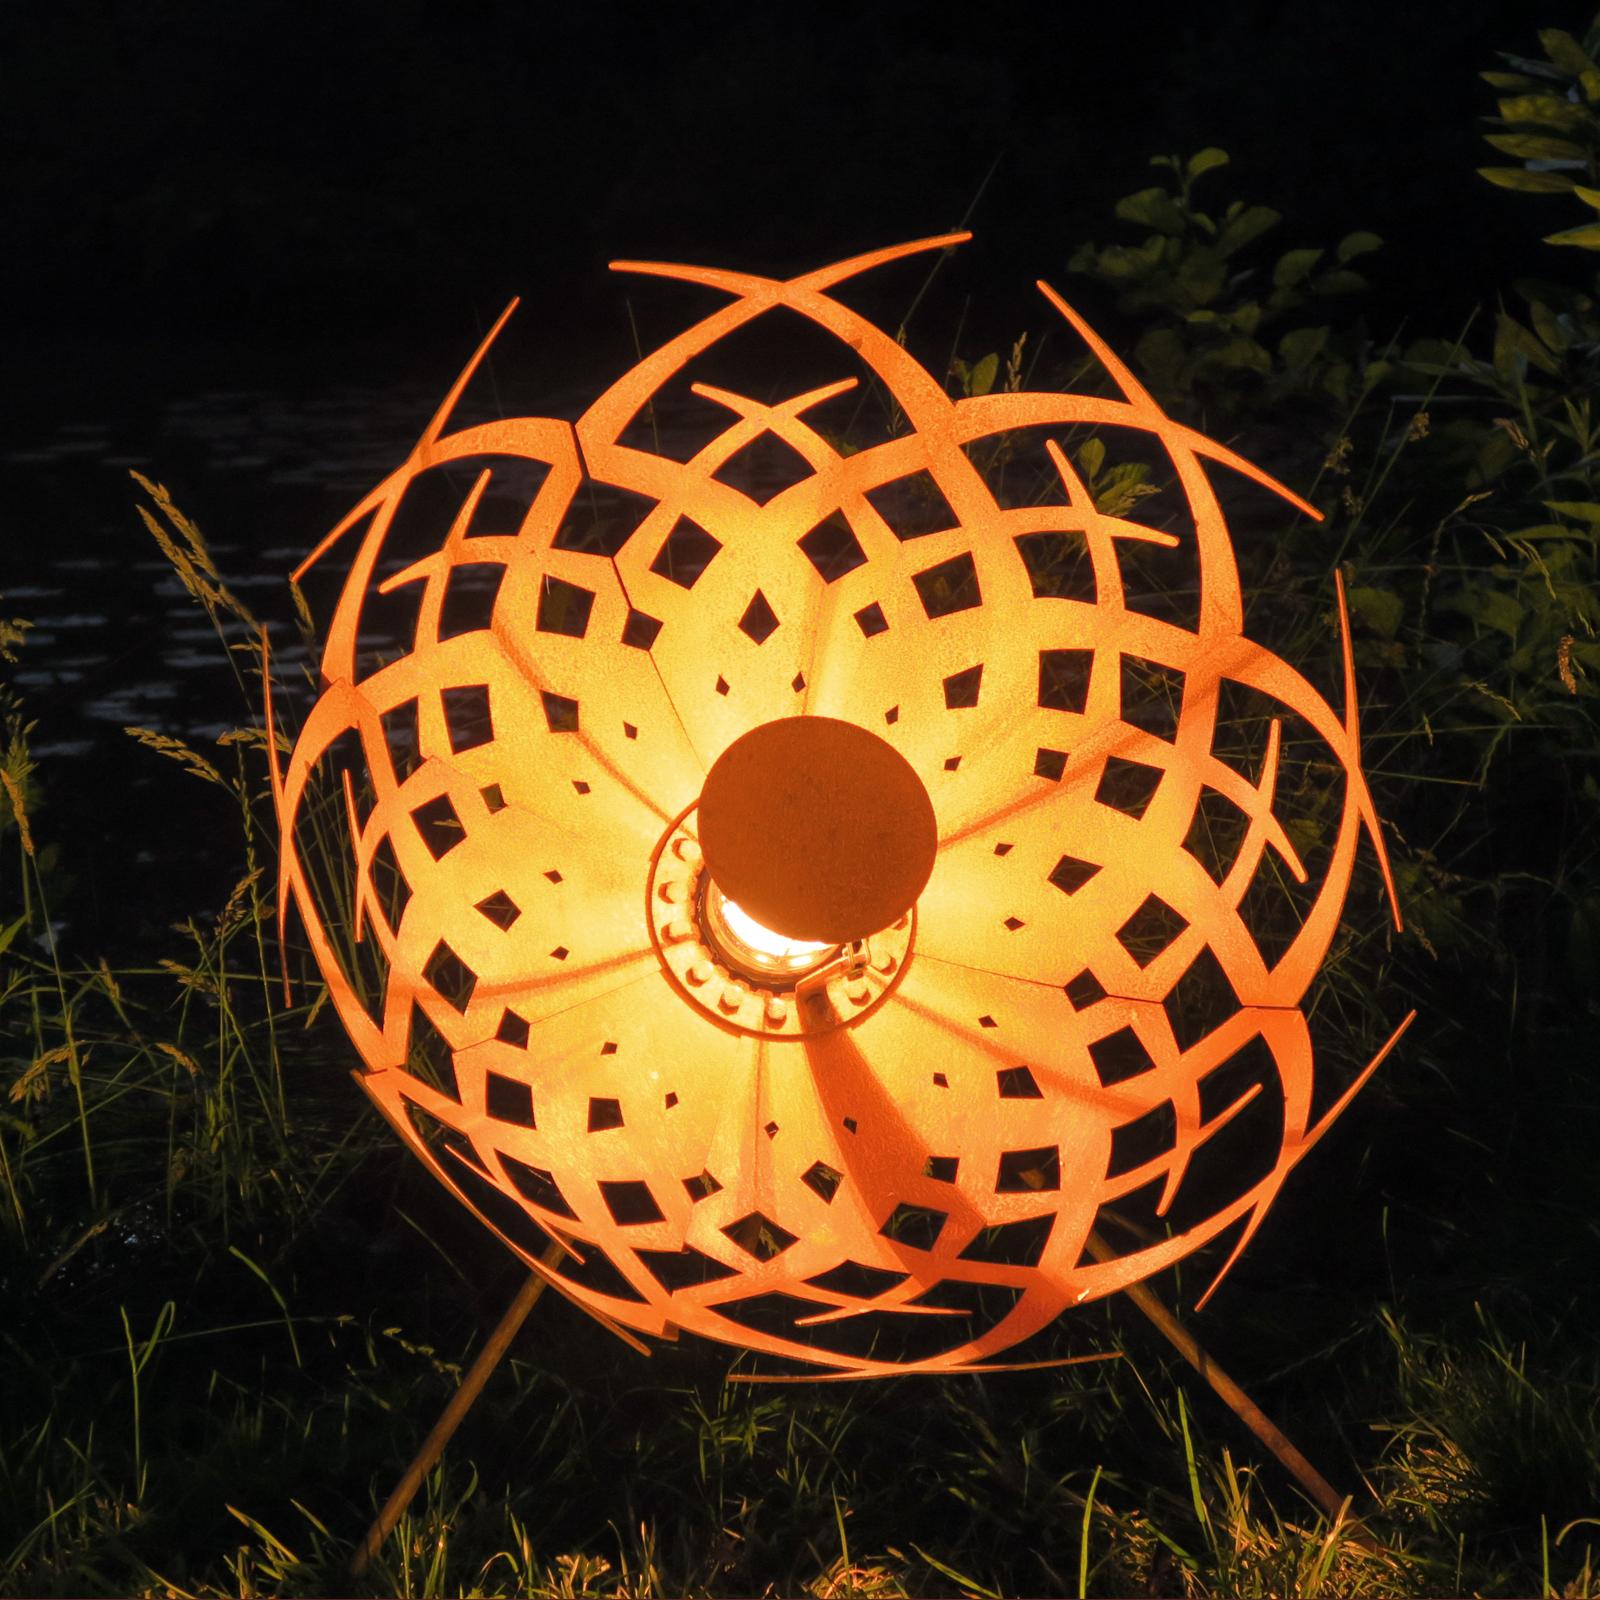 Shade lamp alpha.
Customization possible and designed in 2010.
Also available to order in stainless steel.

High quality outdoor lampshade for the house and garden as well as entrance area.
This lamp impresses with its unique shadow projection.
The